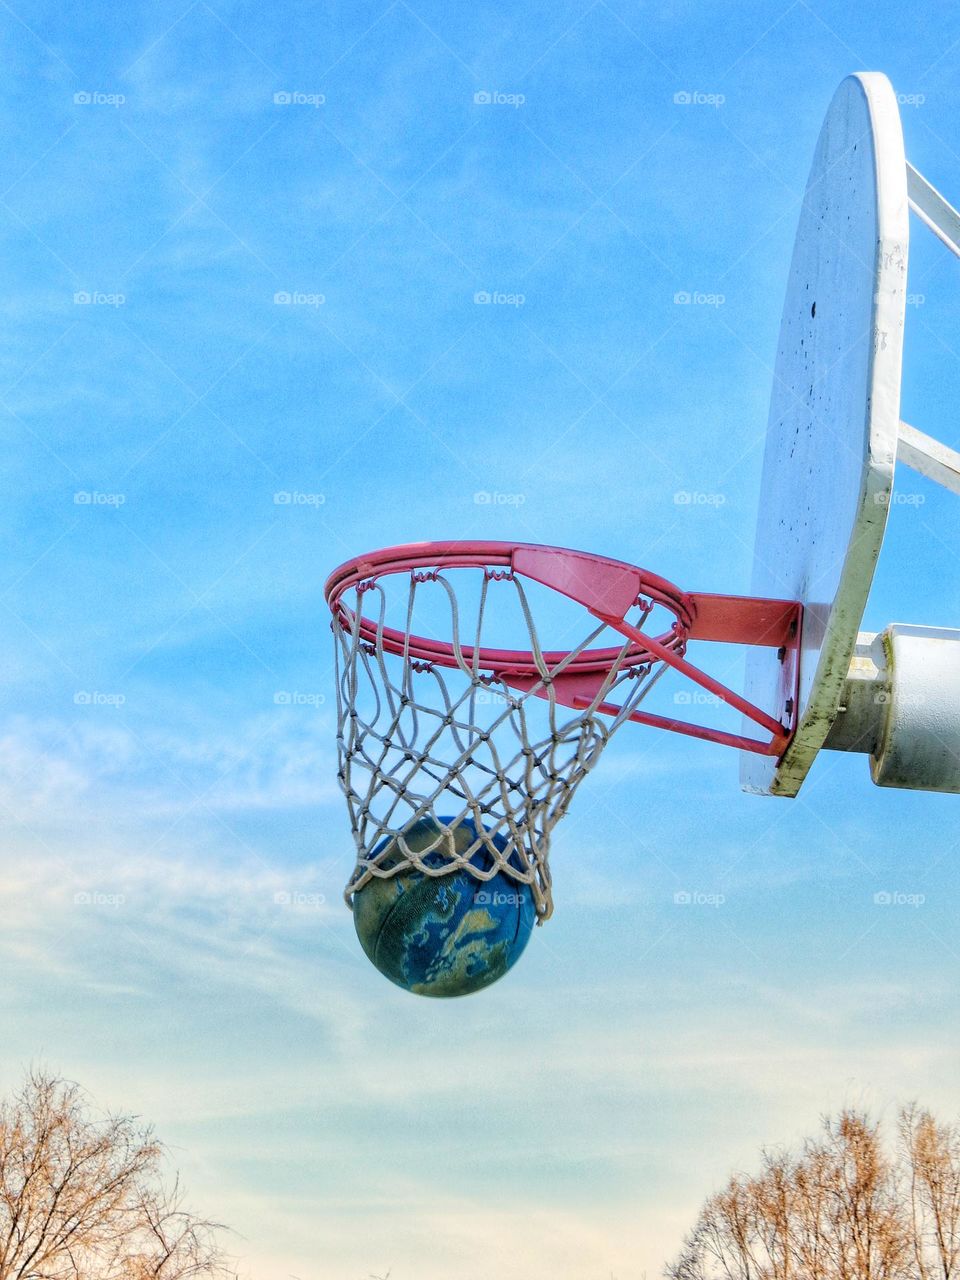 Basketball dropping through the hoop.